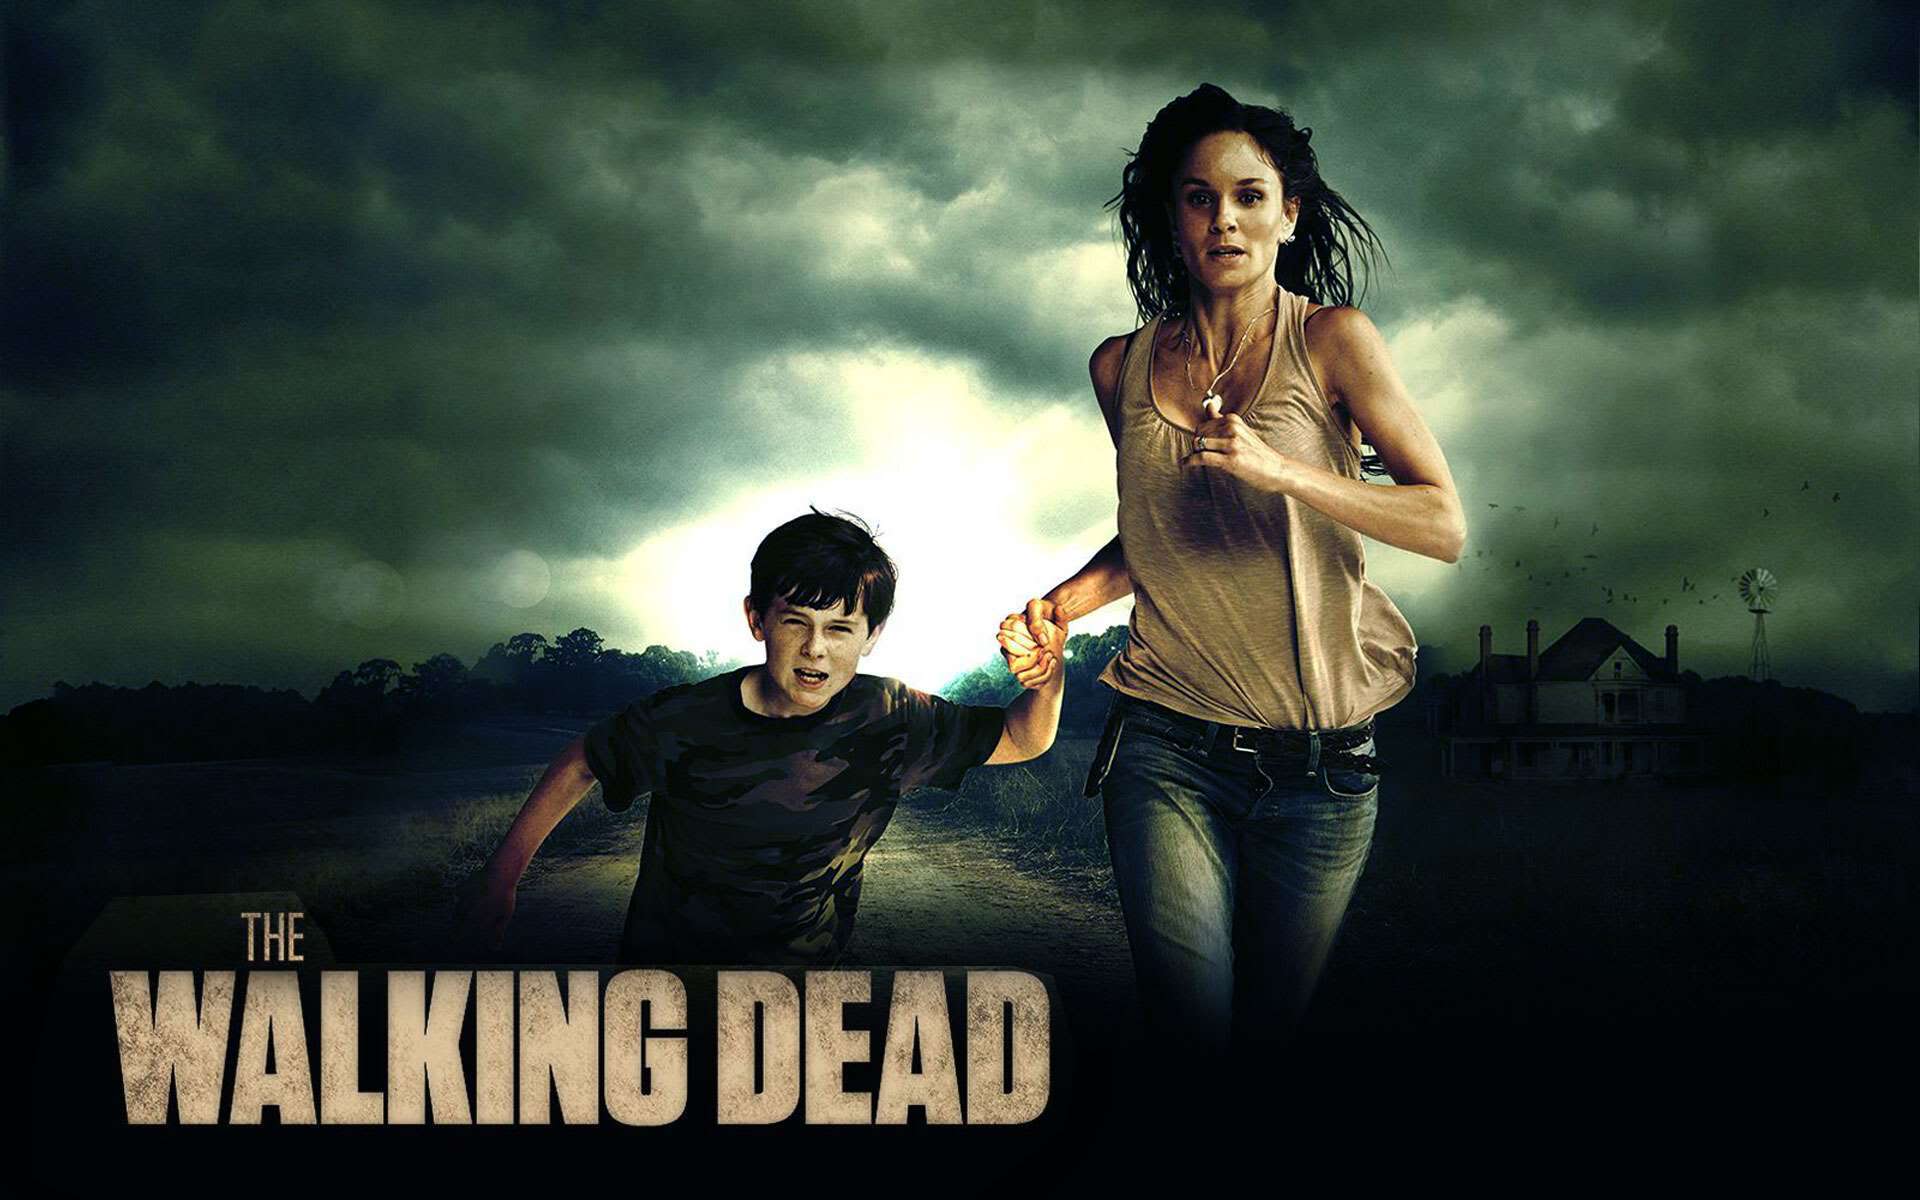 The Walking Dead Background Wallpaper High Definition